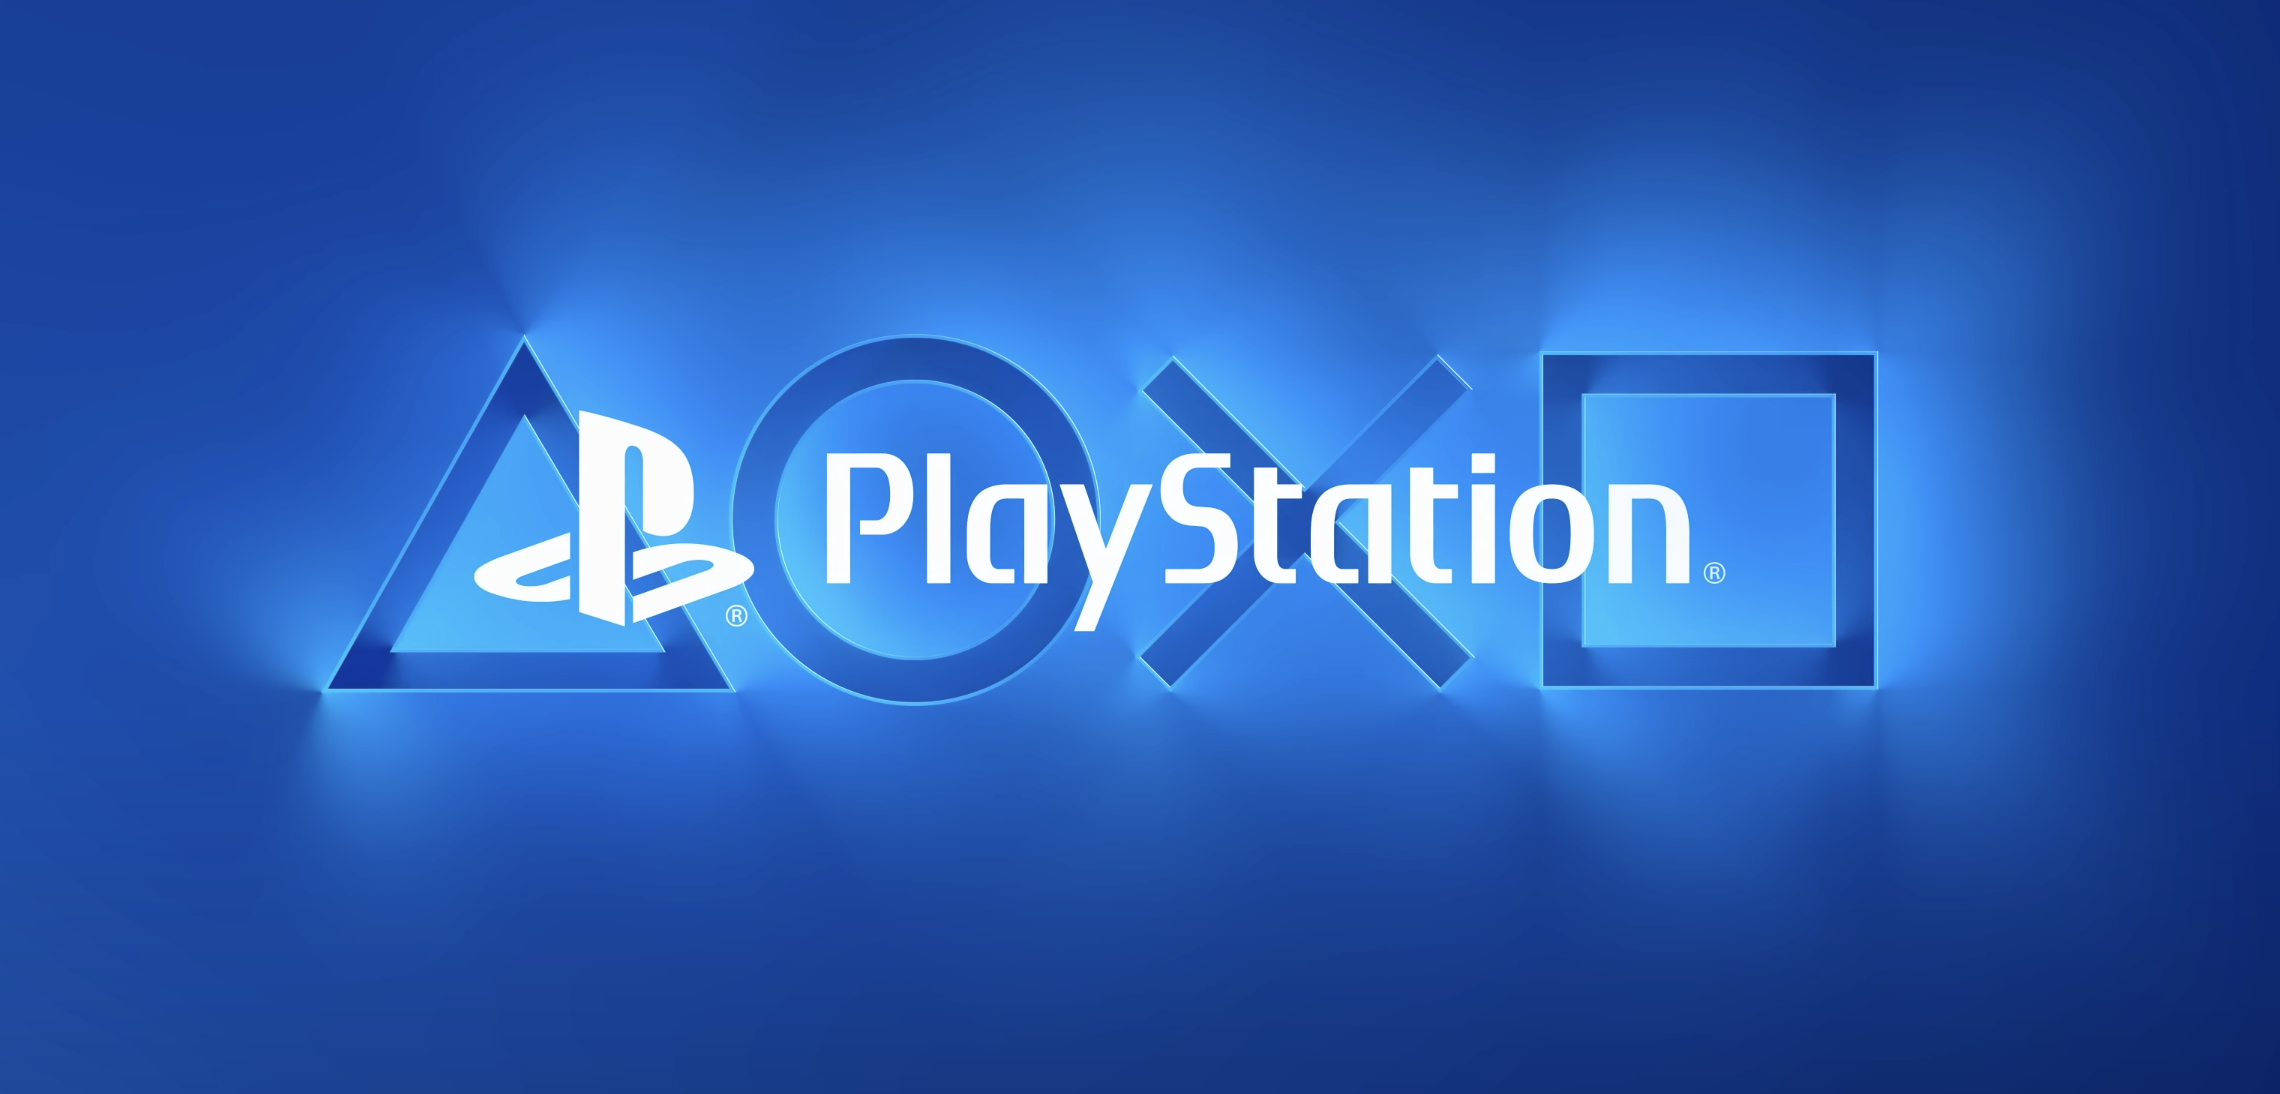 The Playstation logo: a triangle, circle, X, and square in blue behind the words "PlayStation" in white